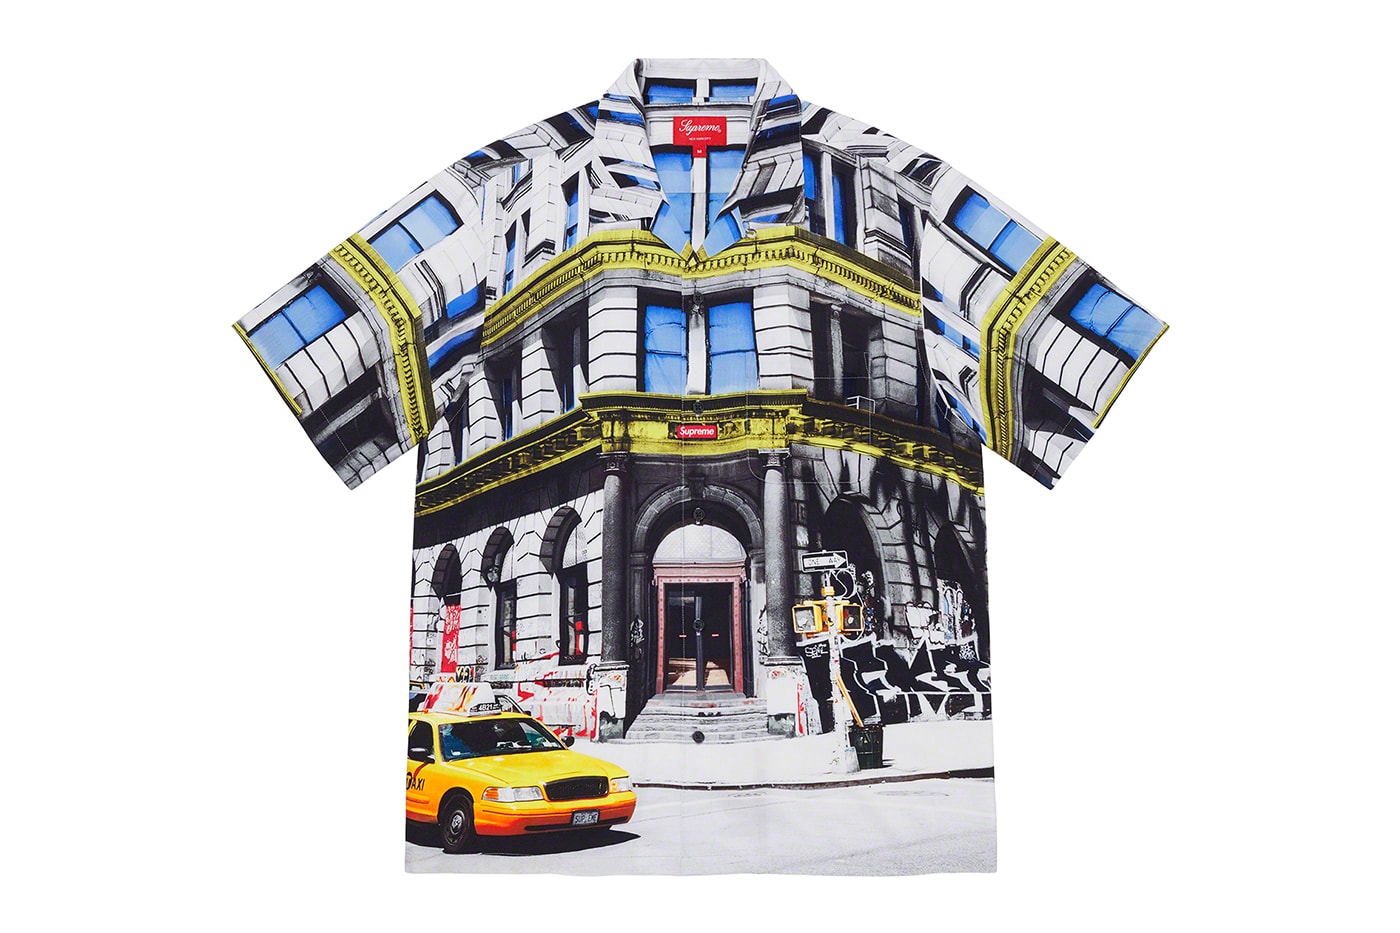 Supreme Spring/Summer 2021 Tops Shirts Notorious BIG  Nick Knight  Clayton Patterson  Mitchell & Ness NYC New York 